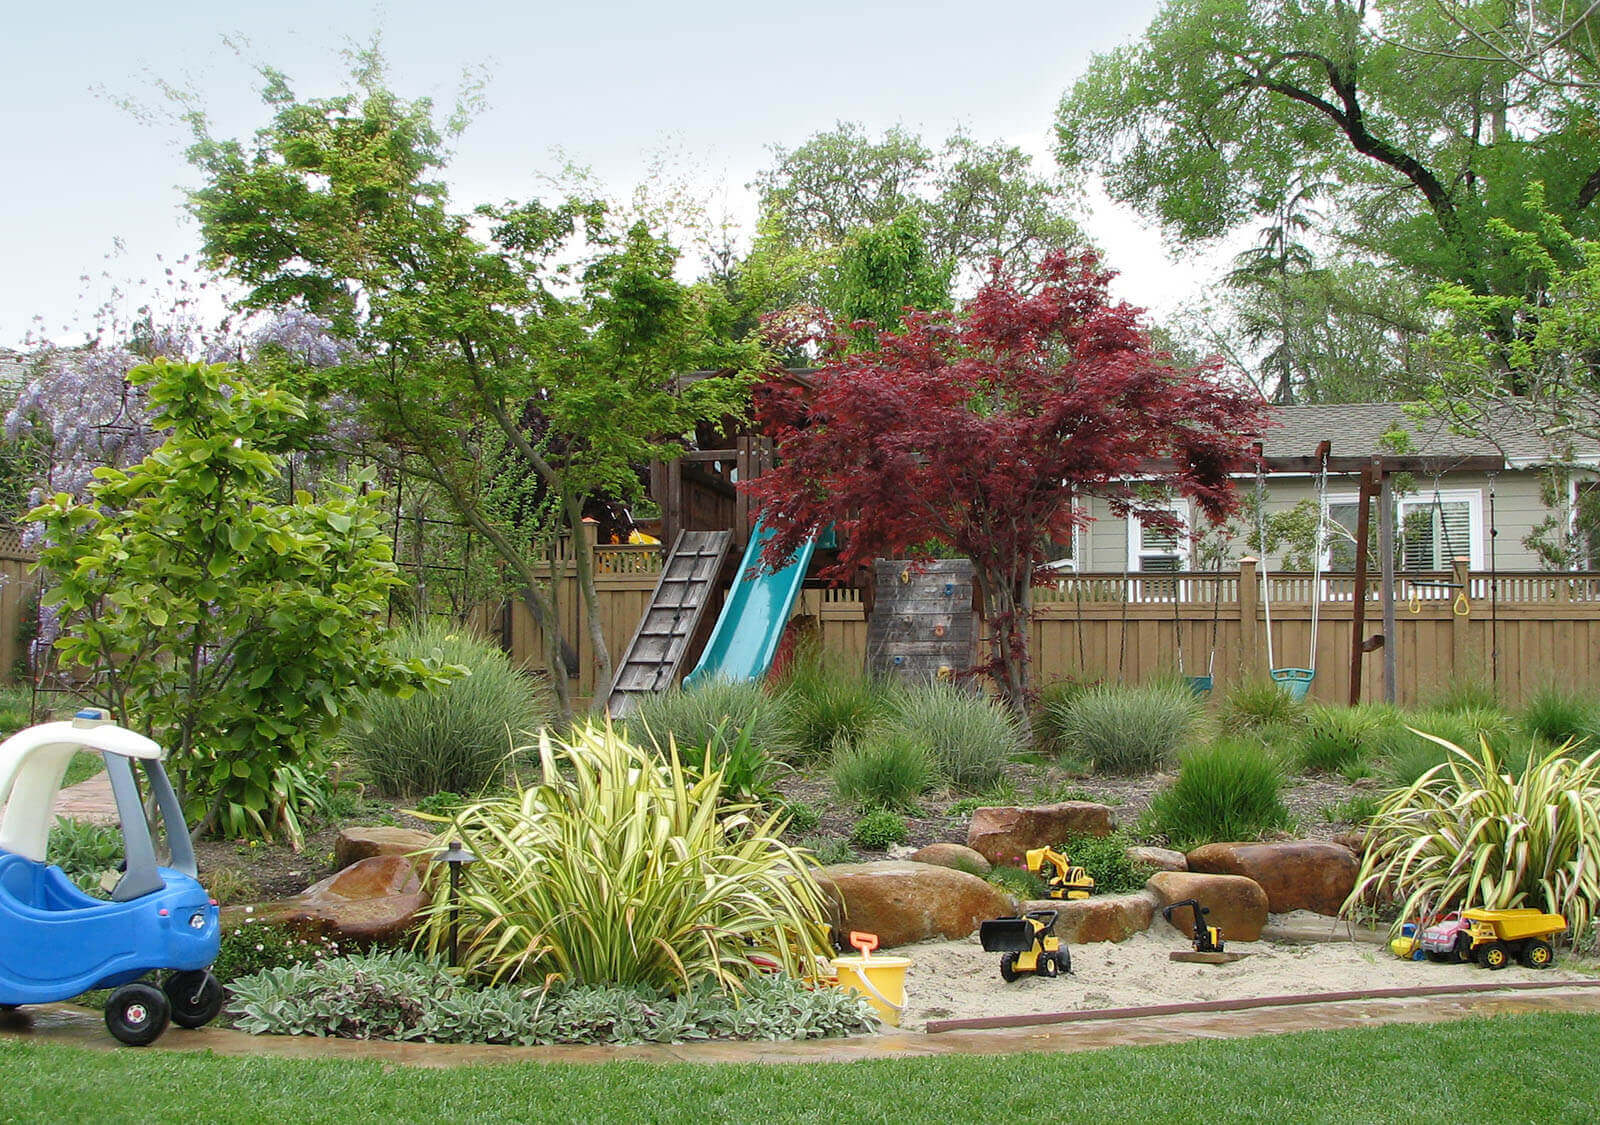 Play - ornamental grass plants spread evenly in yard with stone-lined sandbox, a jungle gym slide with two swings and a swing bar